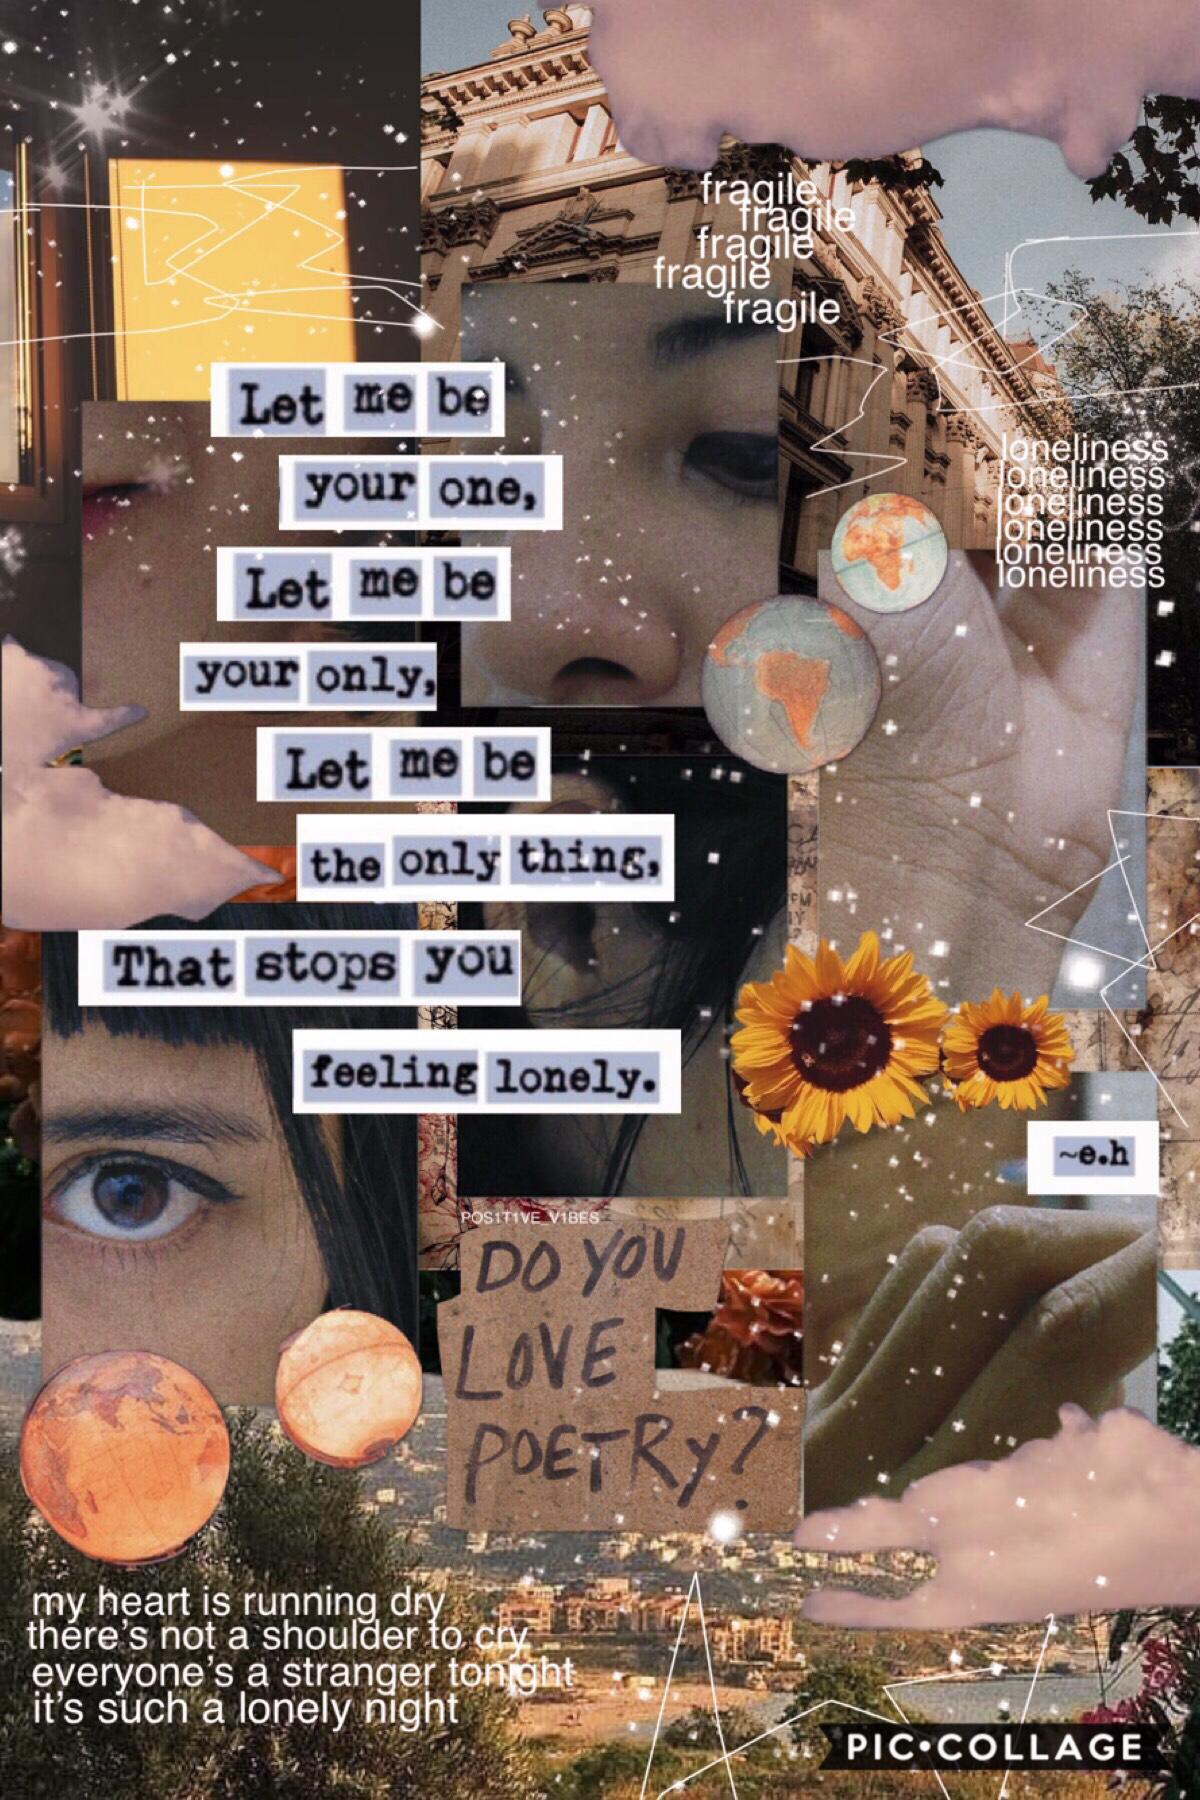 ⚡️aHa here’s a collage finally⚡️i’m drowning in homework which sucks & I fell asleep in class which wasn’t intended while my class was watching a documentary lol⚡️I just finished the book “proxy” & oML it’s so good i can’t⚡️
#PCONLY
#COLLAGE
#LONELY
#ALSE